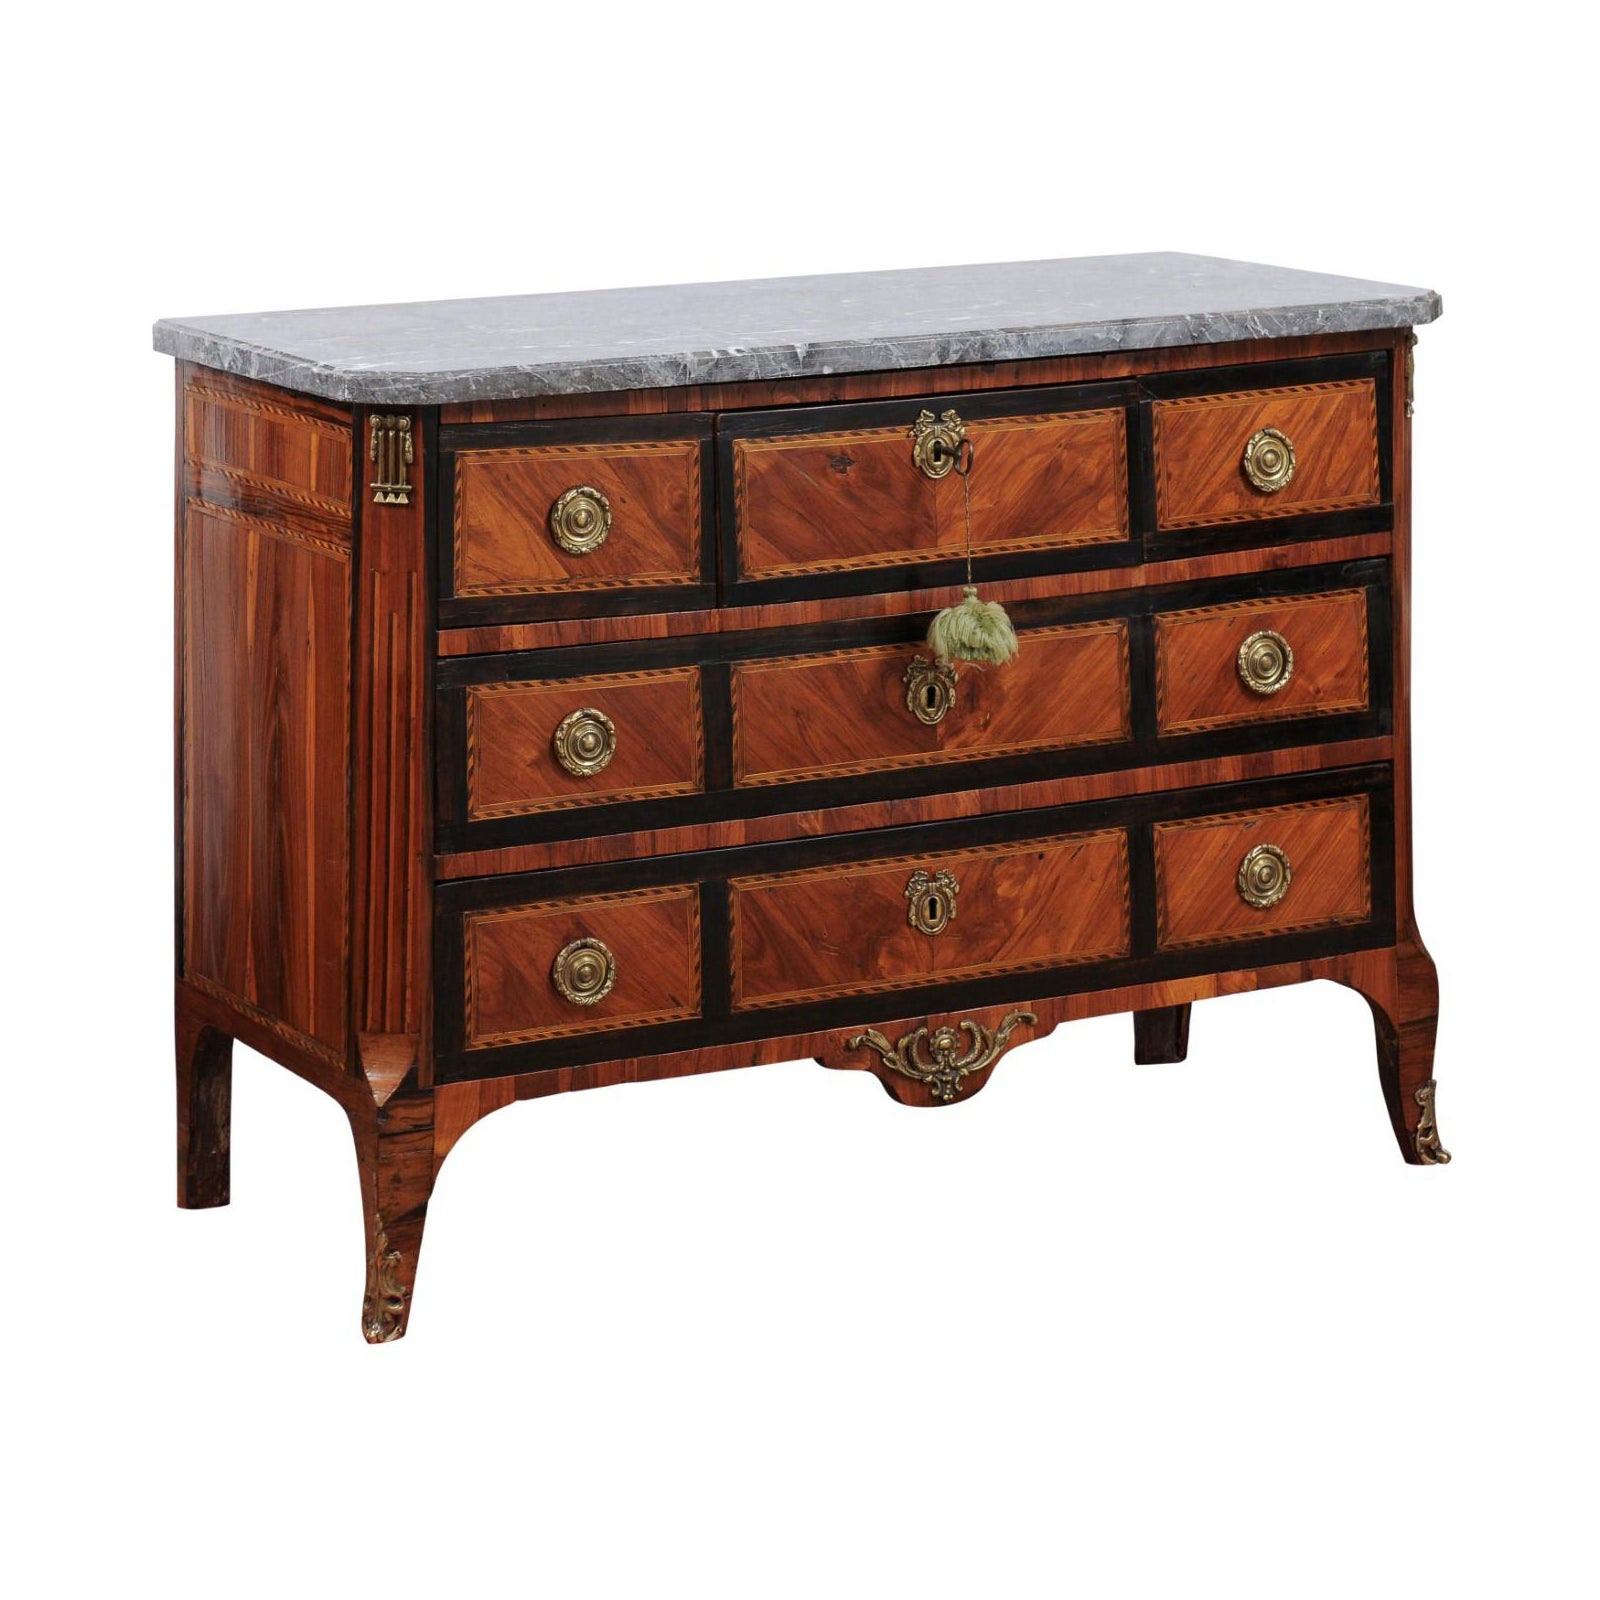 18th Century Continental Inlaid Commode